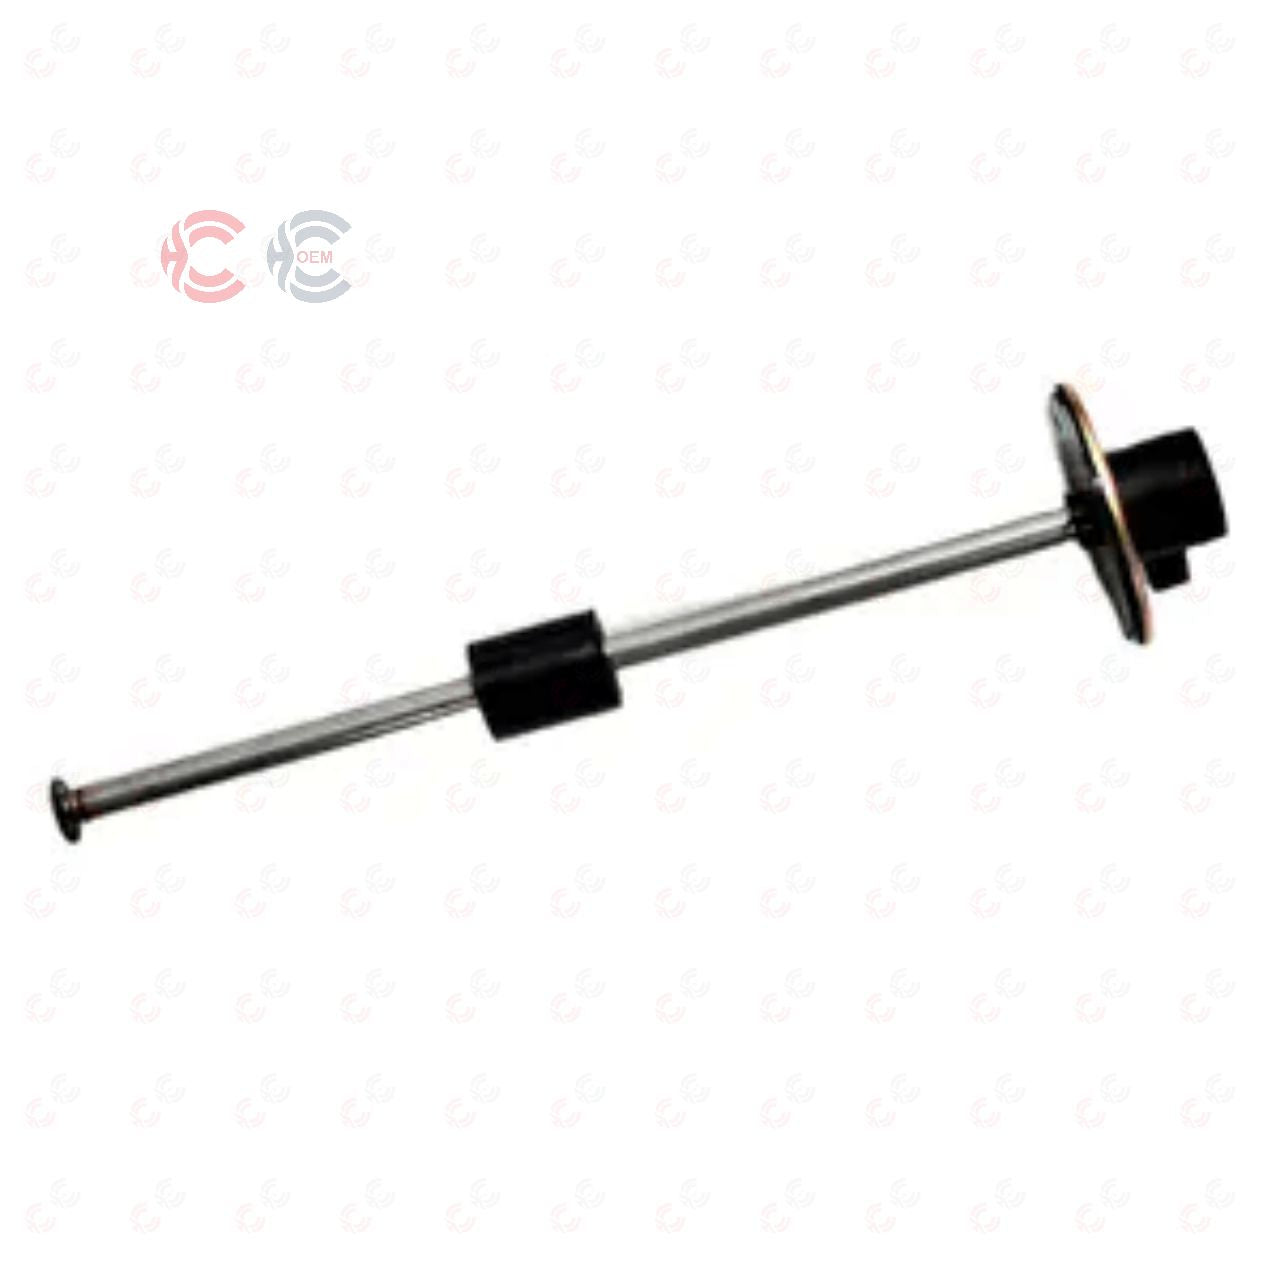 OEM: 3827010-T3200Material: ABS metalColor: Black GoldenOrigin: Made in ChinaWeight: 1000gPacking List: 1* Fuel Level Sensor More ServiceWe can provide OEM Manufacturing serviceWe can Be your one-step solution for Auto PartsWe can provide technical scheme for you Feel Free to Contact Us, we will get back to you as soon as possible.